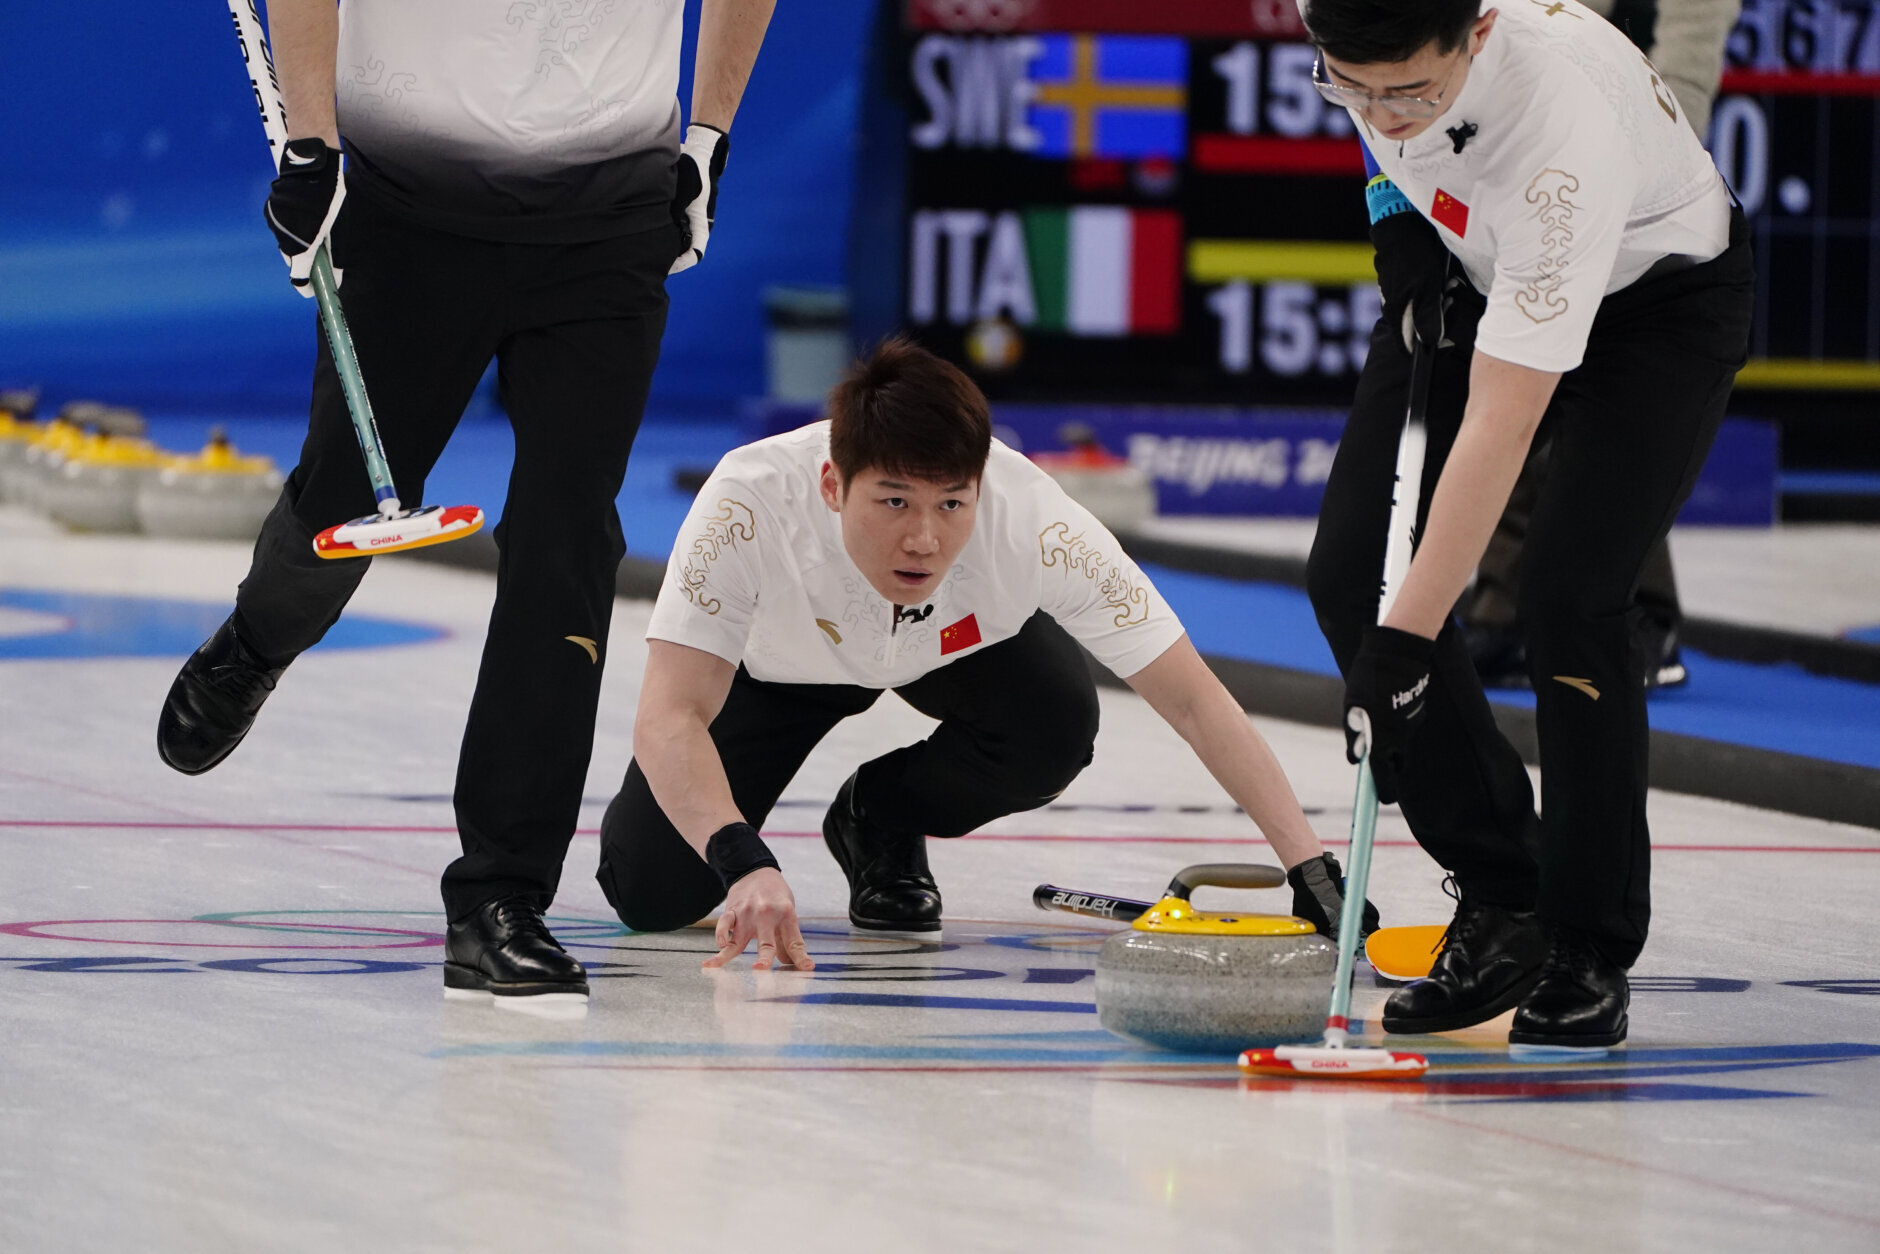 <p>China&#8217;s Wang Zhiyu throws a rock during a men&#8217;s curling match against Denmark at the Beijing Winter Olympics Friday, Feb. 11, 2022, in Beijing.</p>
